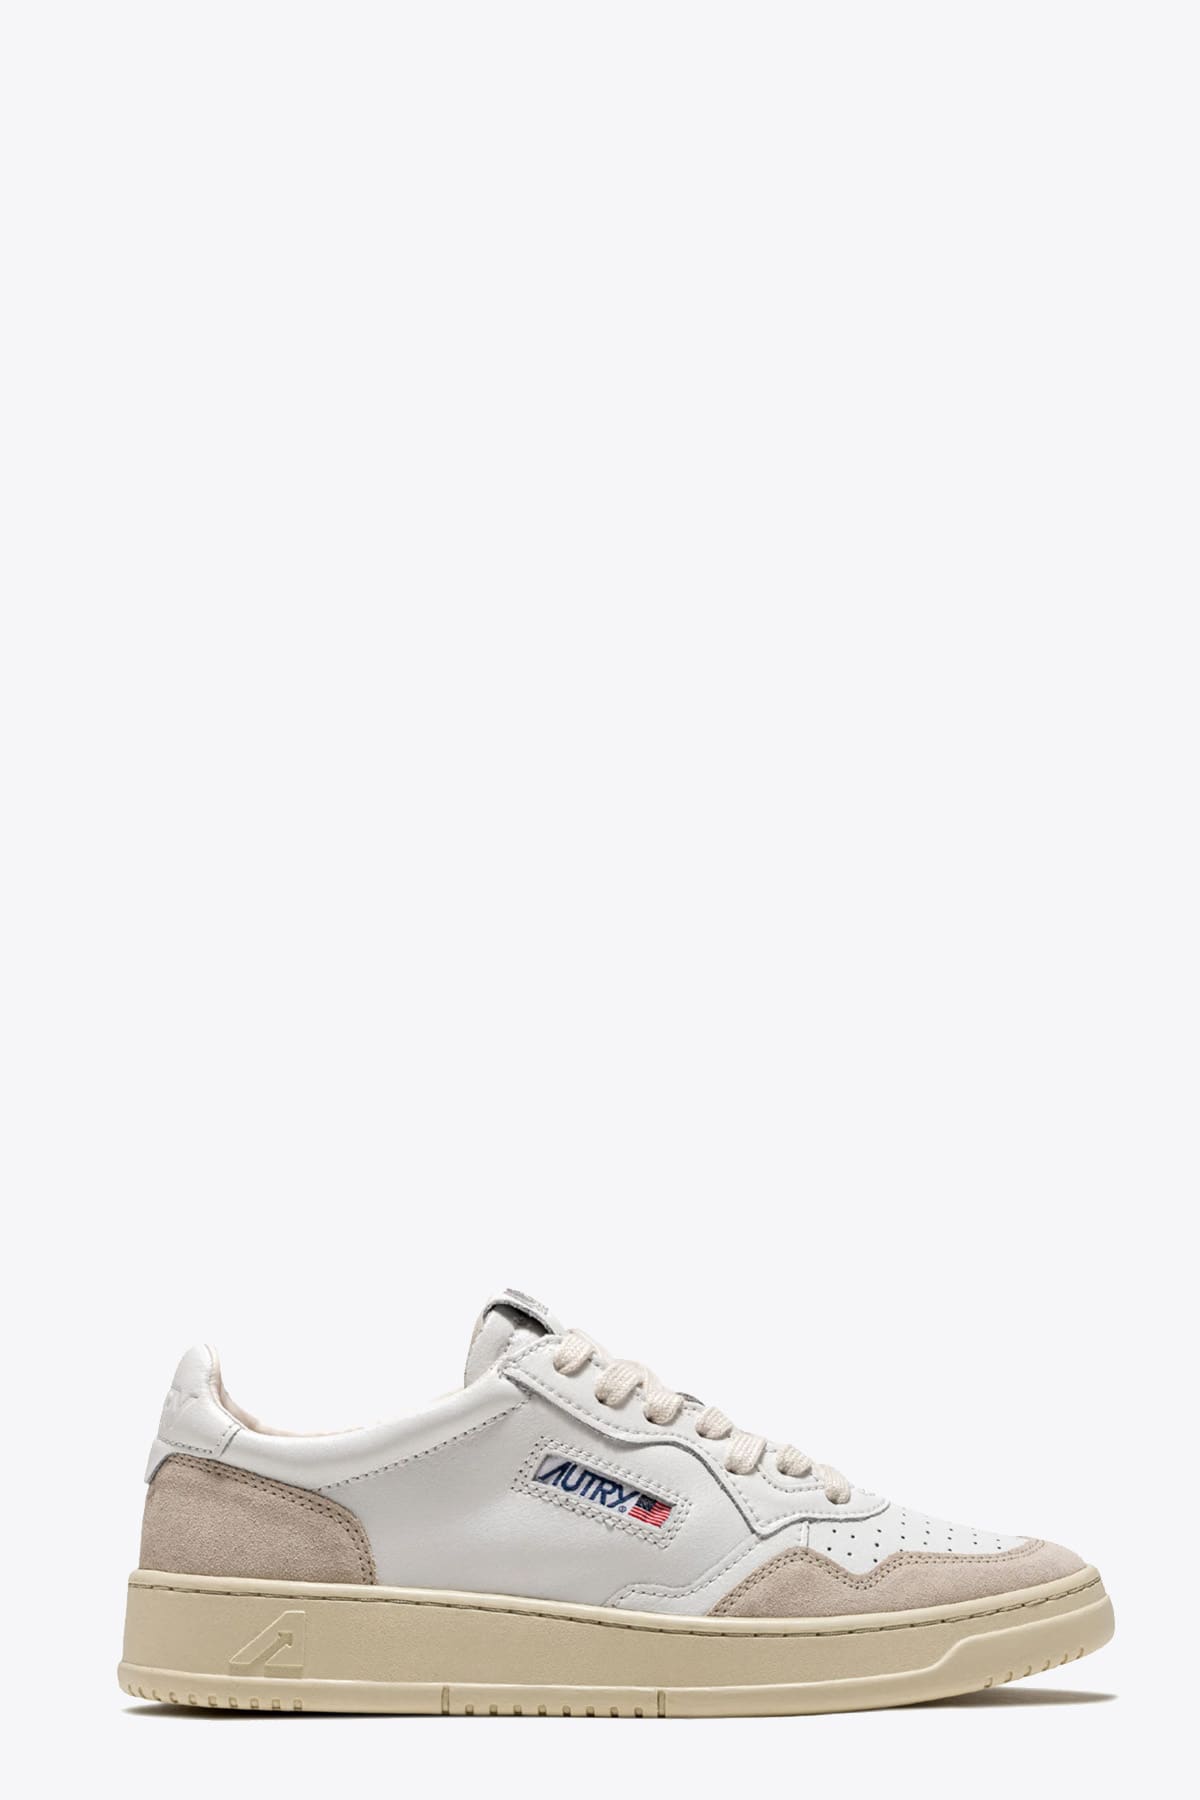 Autry 01 Low Wom Leat Suede White White leather and suede low sneaker - Medalist